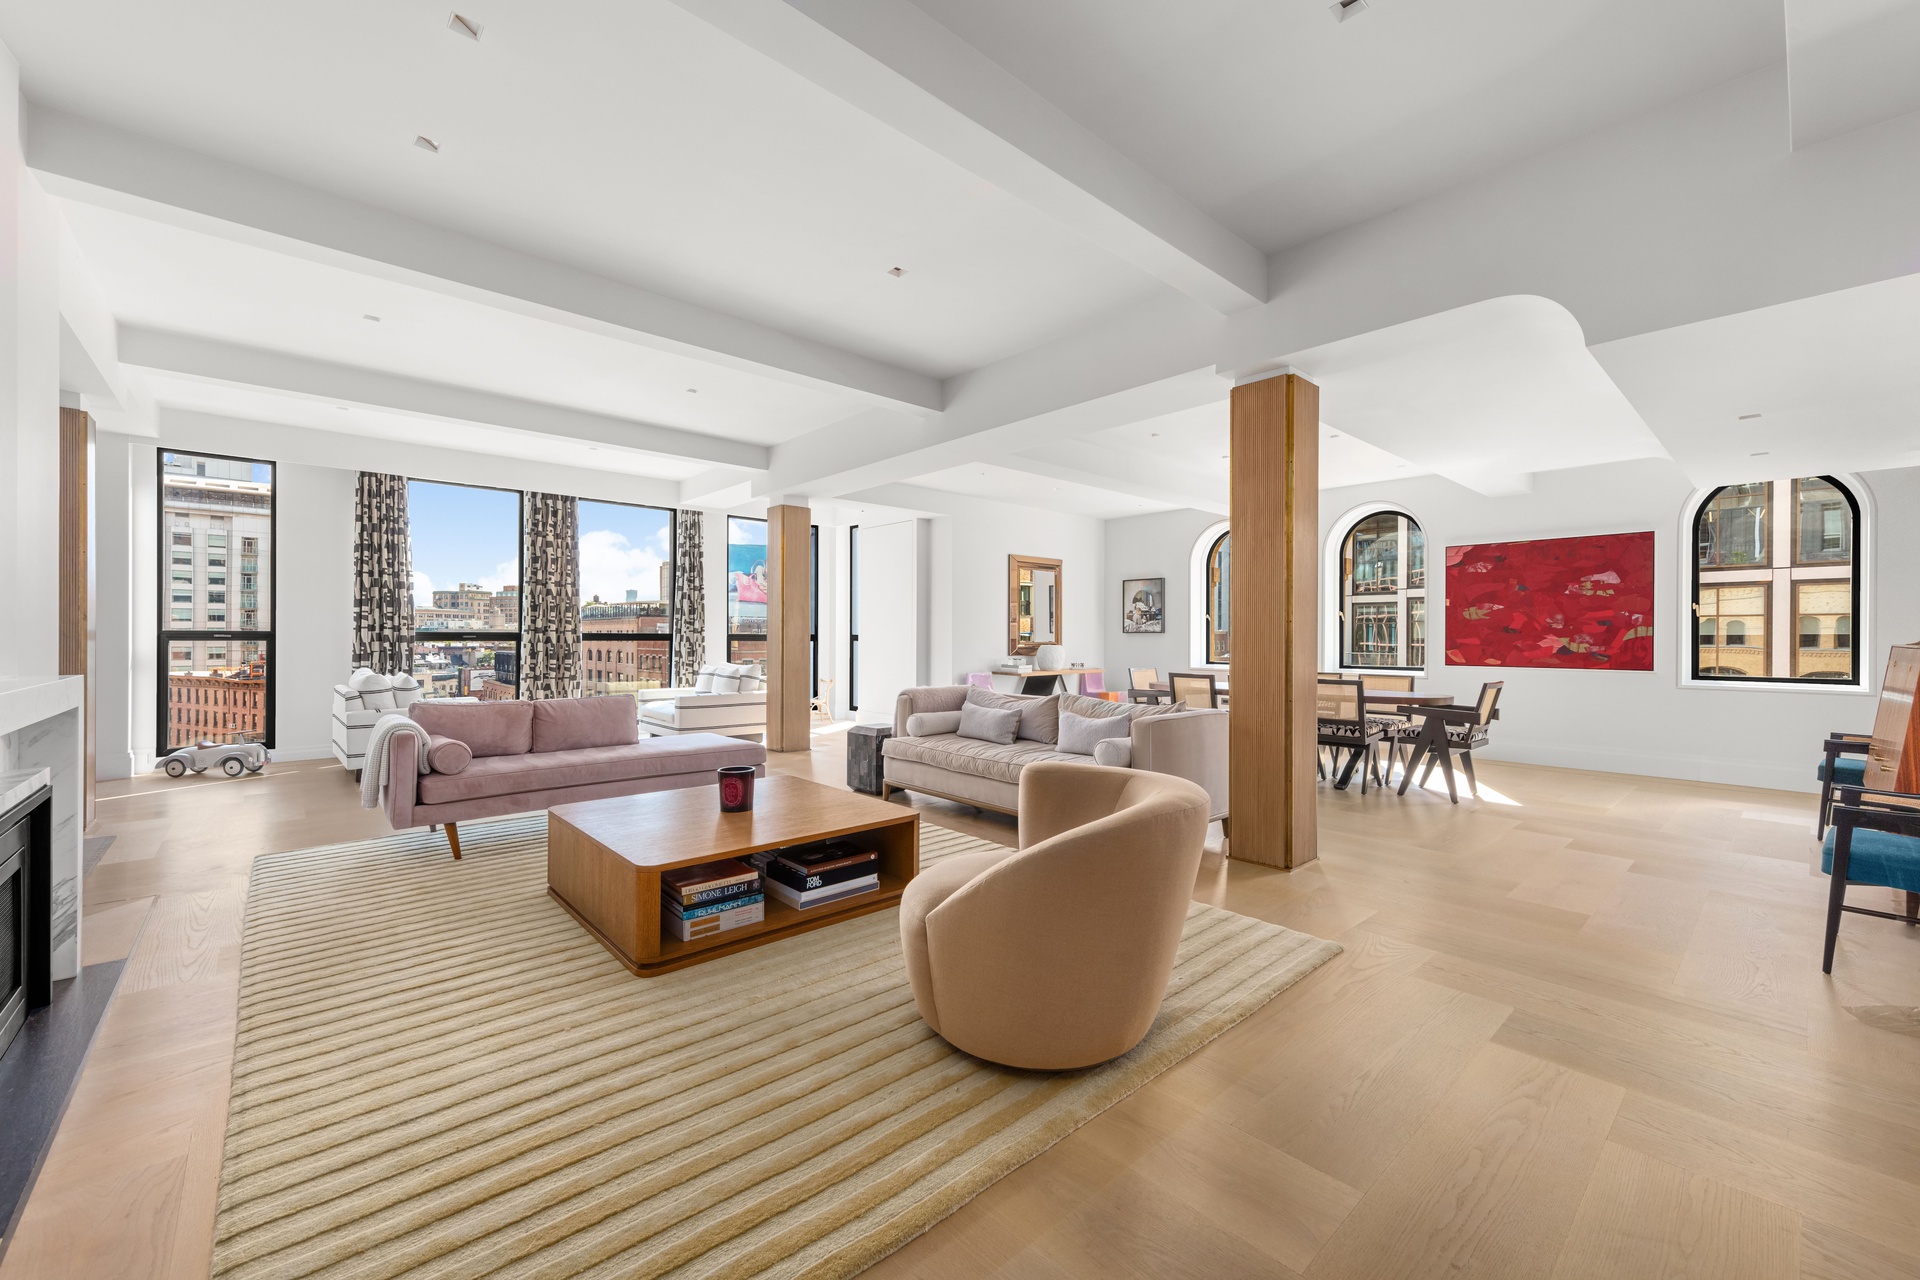 66 9th Avenue 6-Flr, Chelsea, Downtown, NYC - 6 Bedrooms  
6.5 Bathrooms  
13 Rooms - 